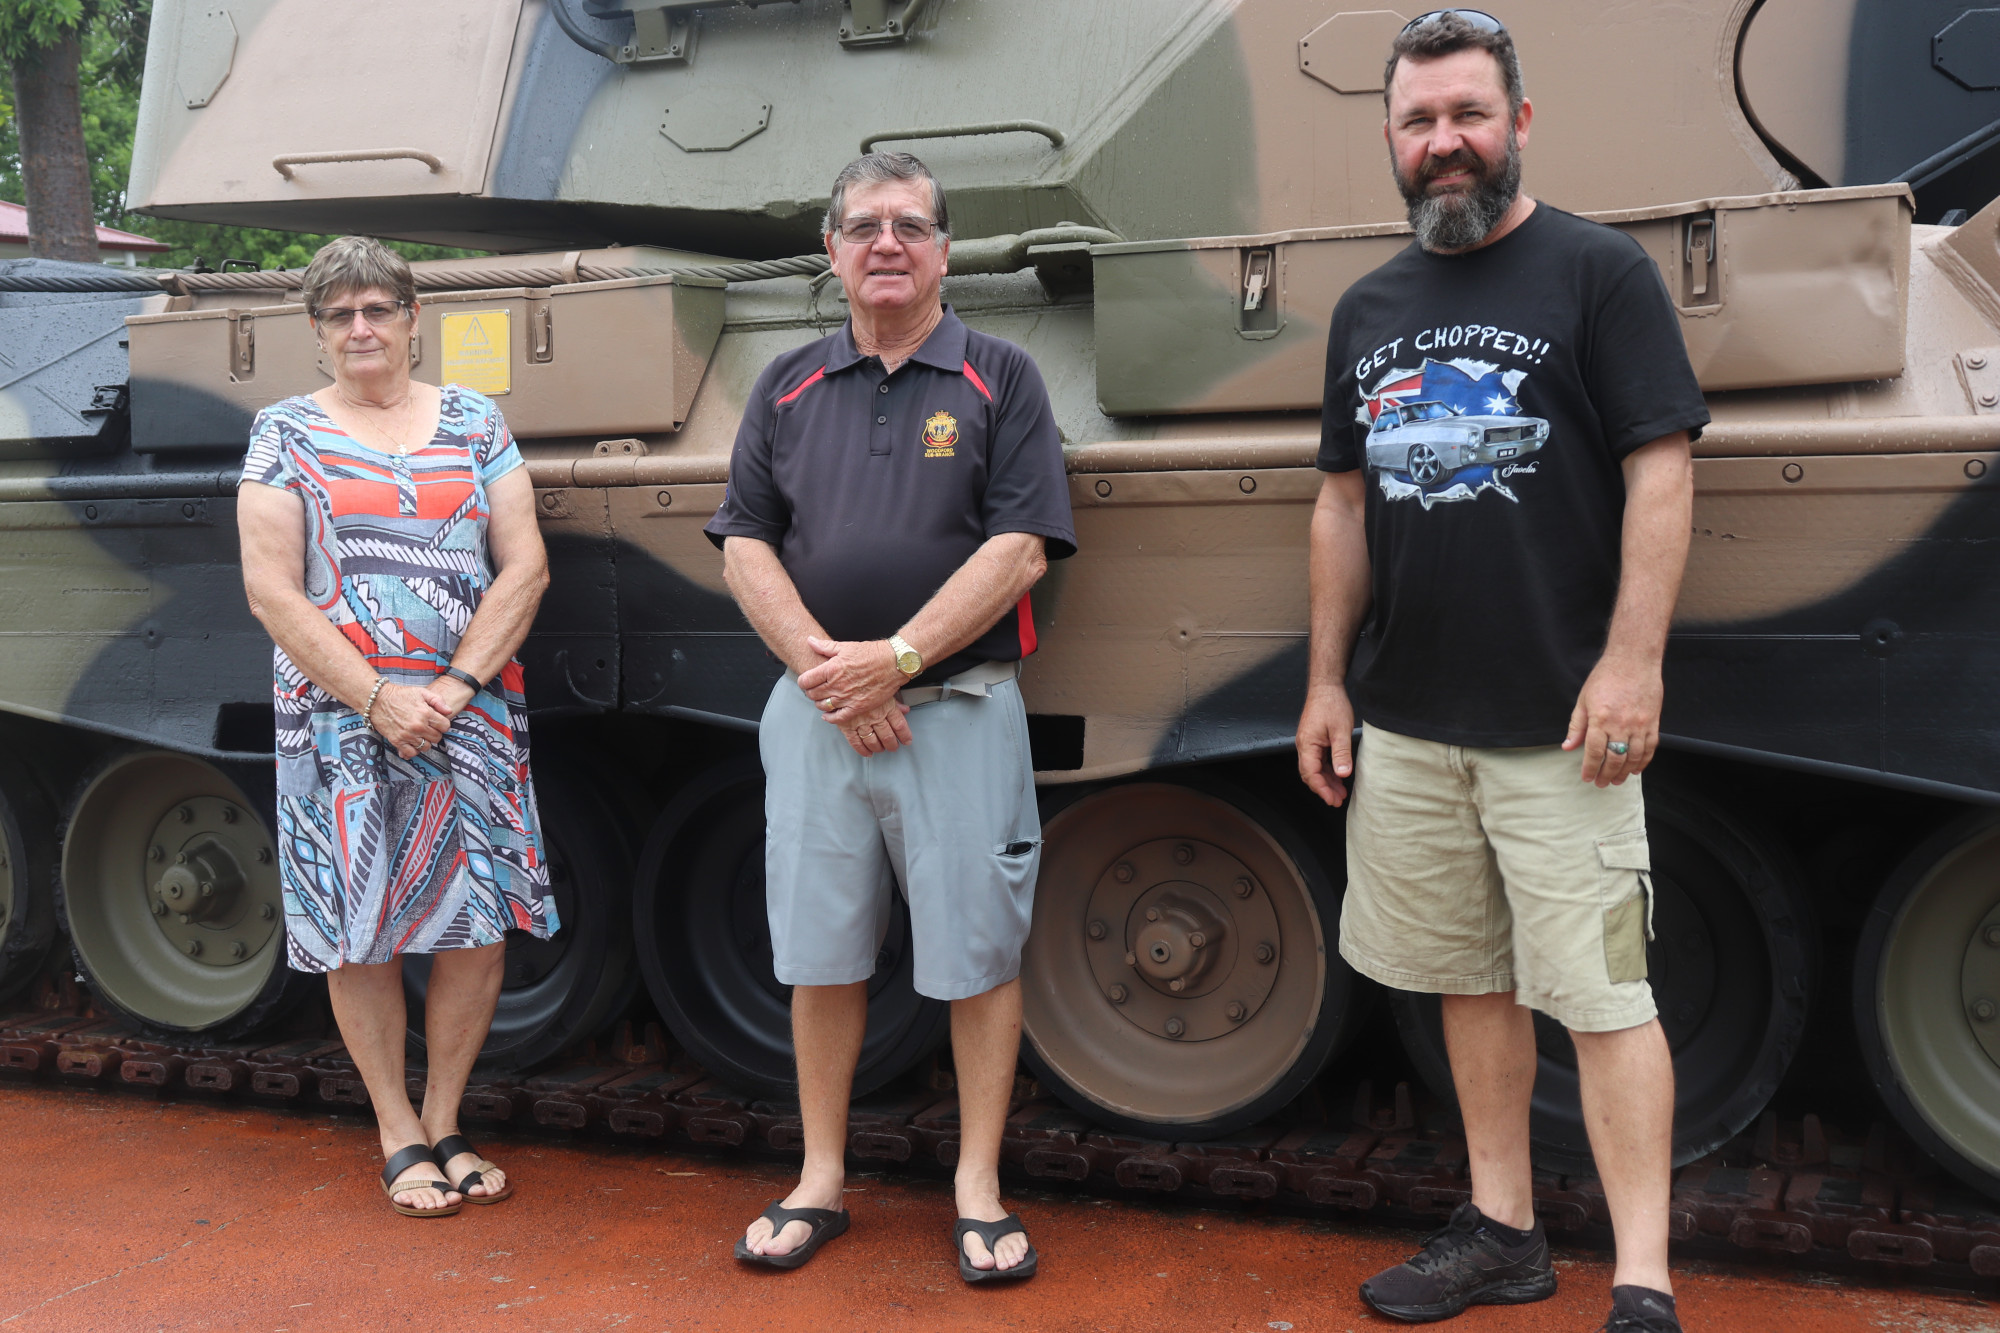 Photo: Woodford RSL tank receives a Get Chopped make-over Woodford RSL Sub Brach Secretary Lyn Whatley and President Graham Bleakley with Darren Cardiff from Get Chopped